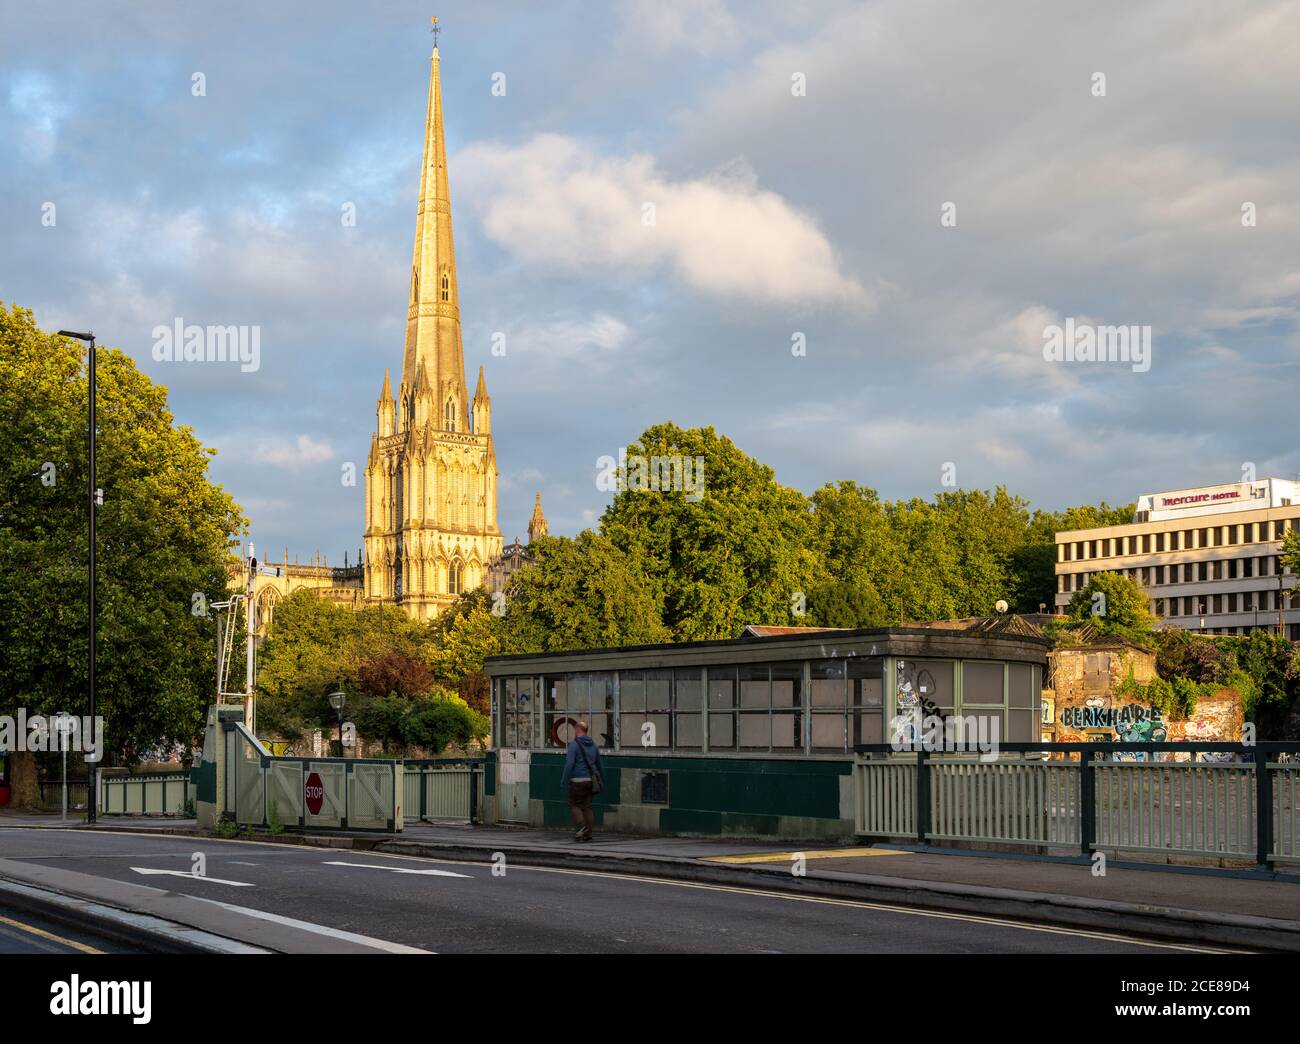 A pedestrian crosses Bristol's Floating Harbour on Redcliffe Bridge, with evening sun lighting the landmark spire of St Mary Redcliffe church behind. Stock Photo